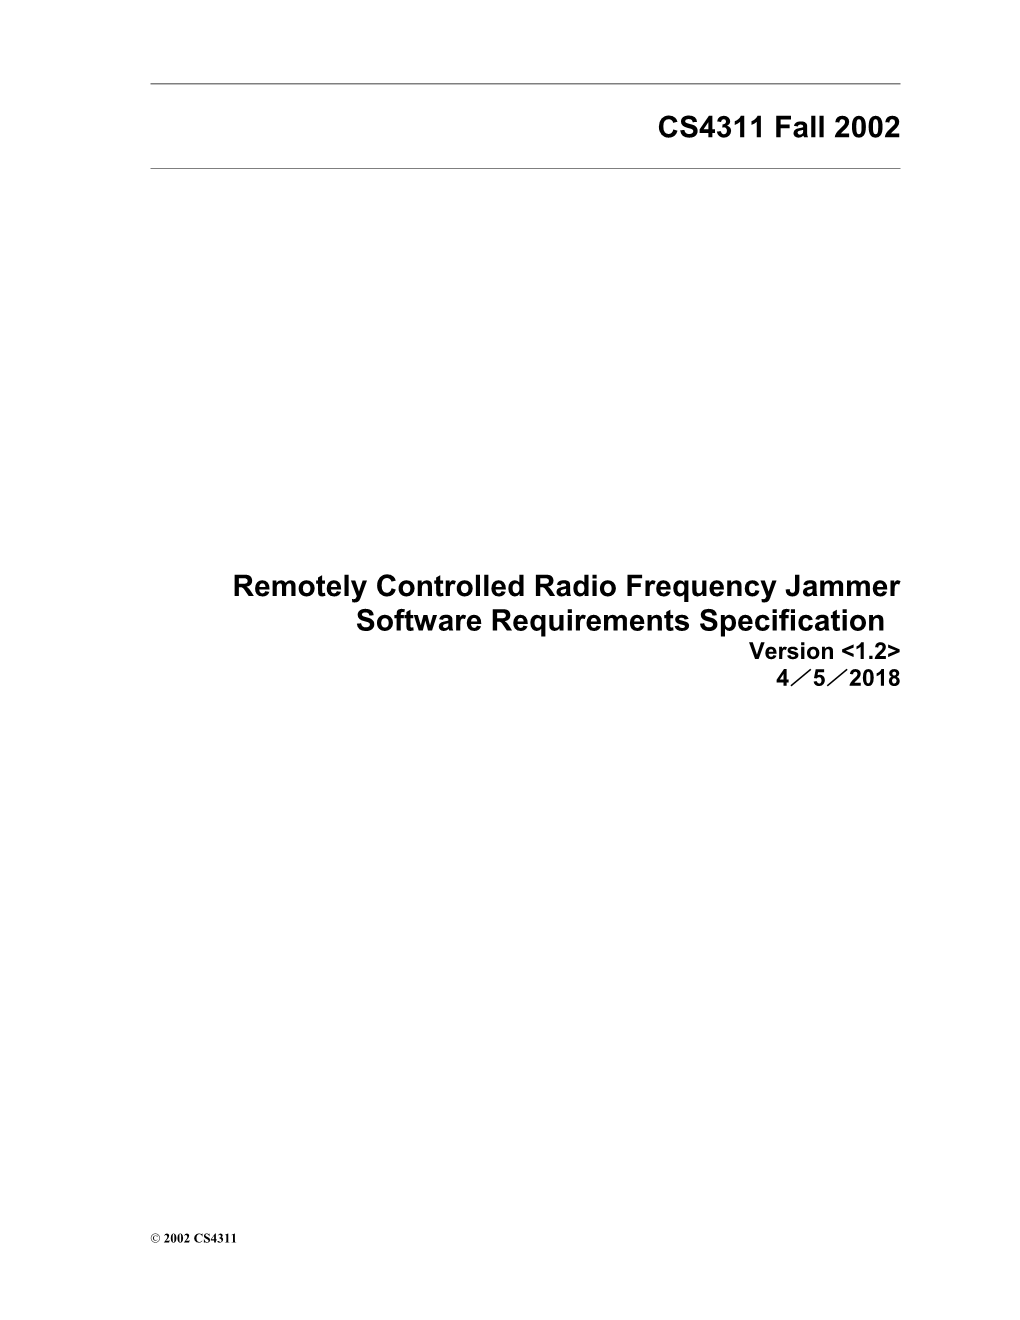 Software Requirements Specification s3